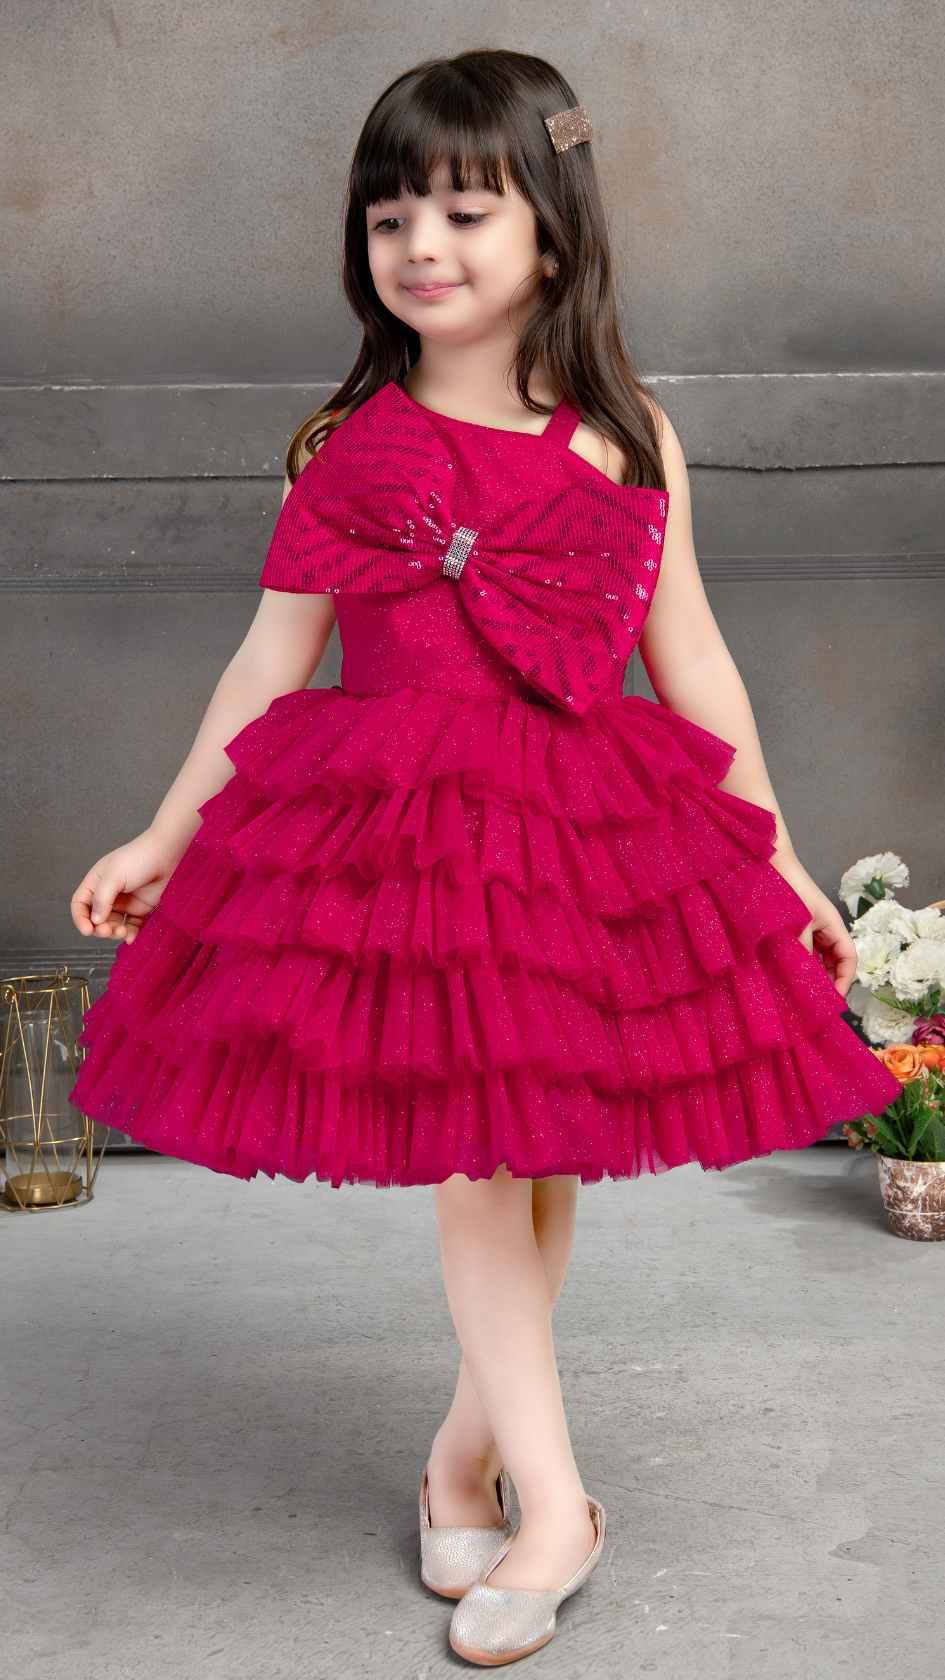 Rani Pink Multilayer Net Ruffled Partywear Frock With Bow Embellishment For Girls - Lagorii Kids